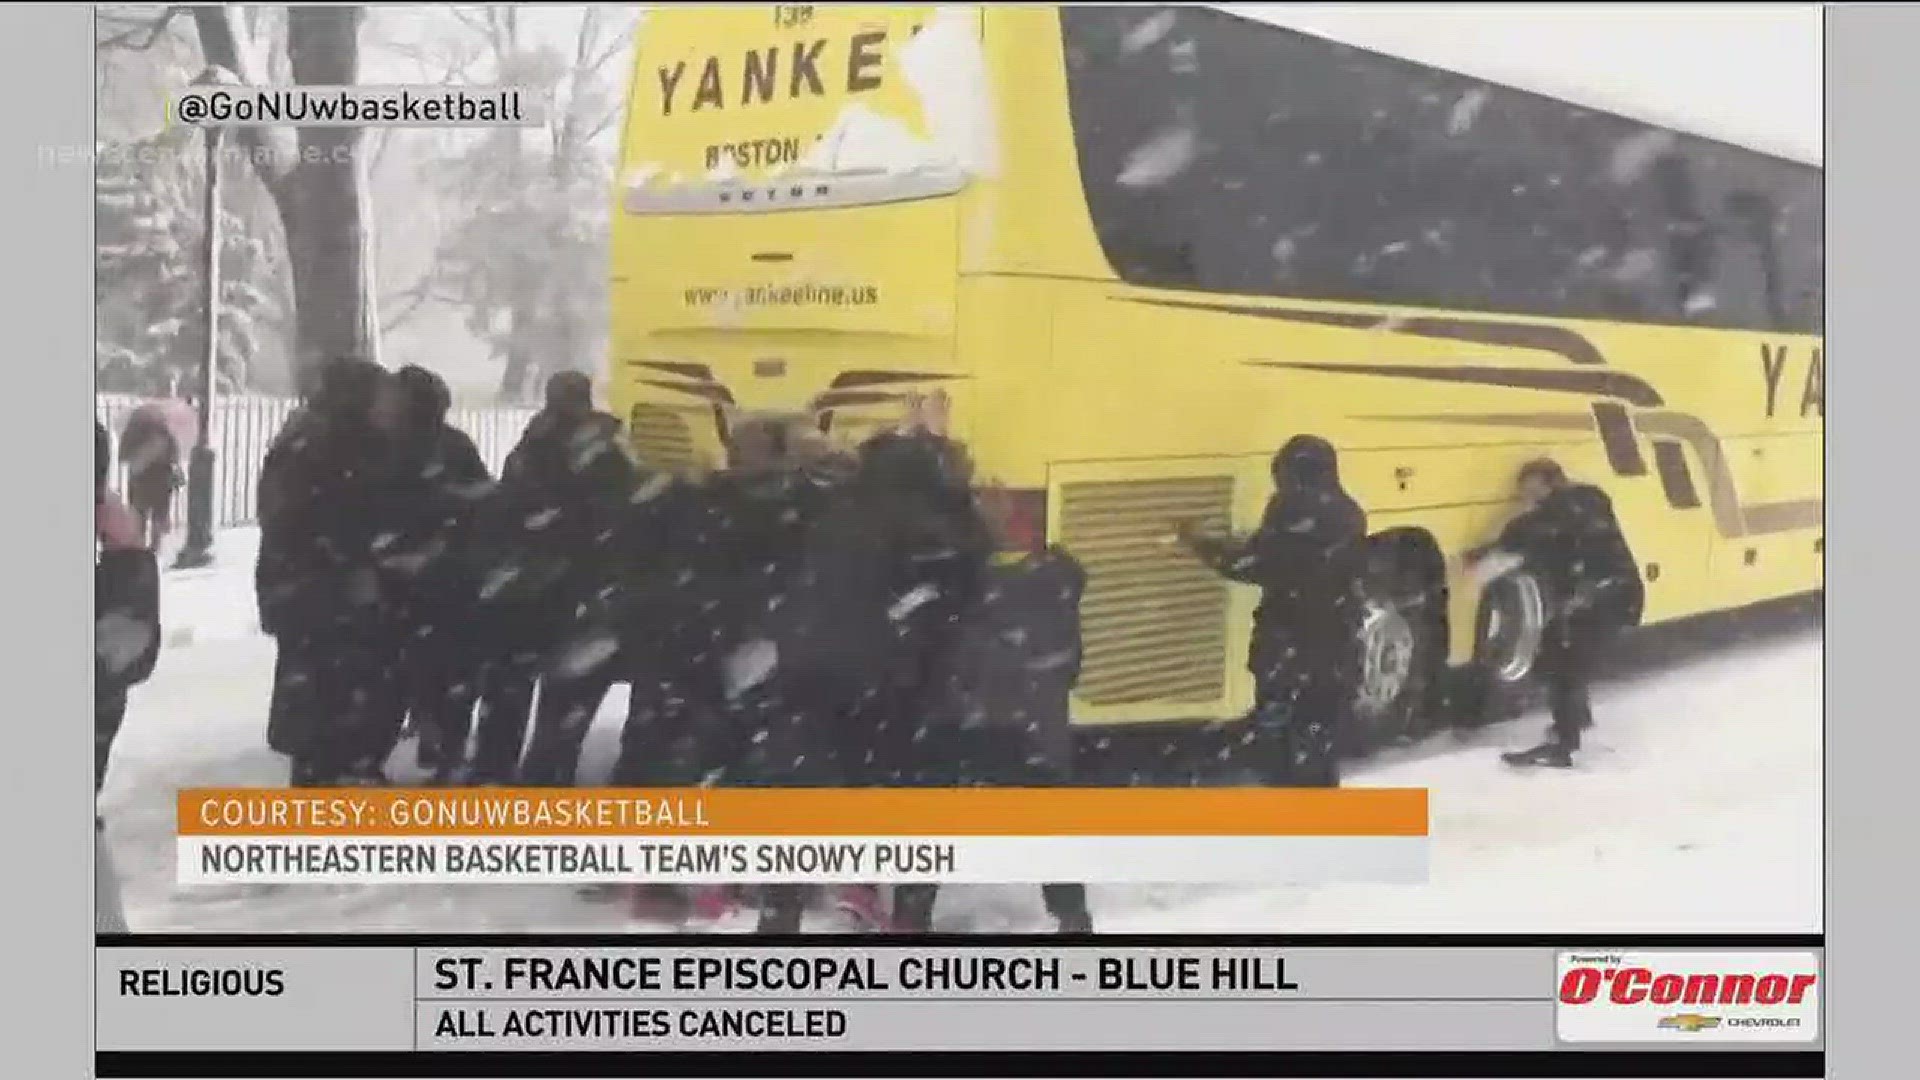 Women's basketball team from Northeastern pushes bus in the snow